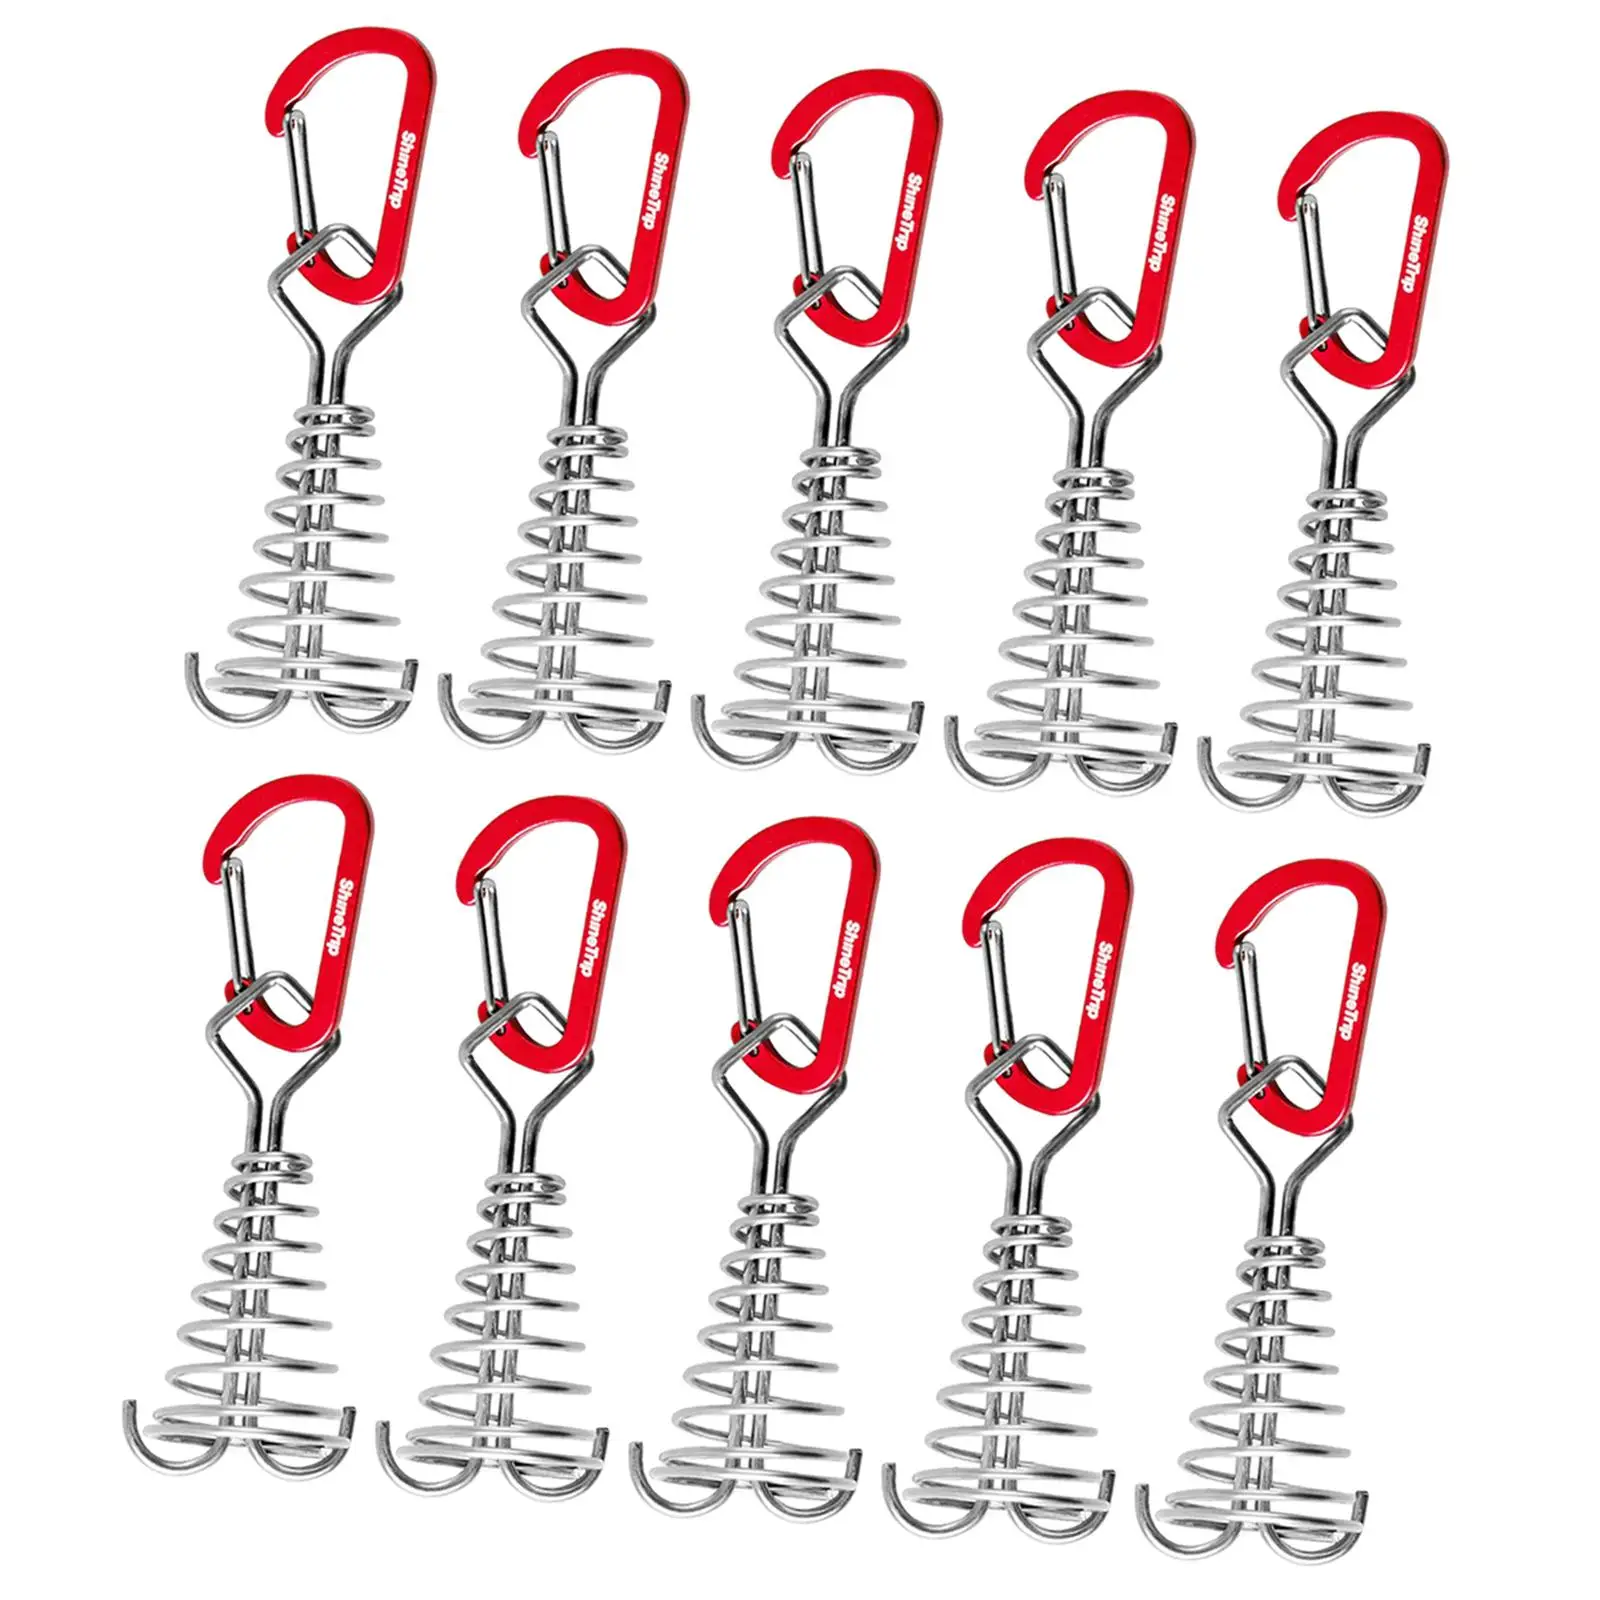 10x Deck Anchor Pegs Awning Anchor Canopy Tent Anchors with Carabiner Clips for